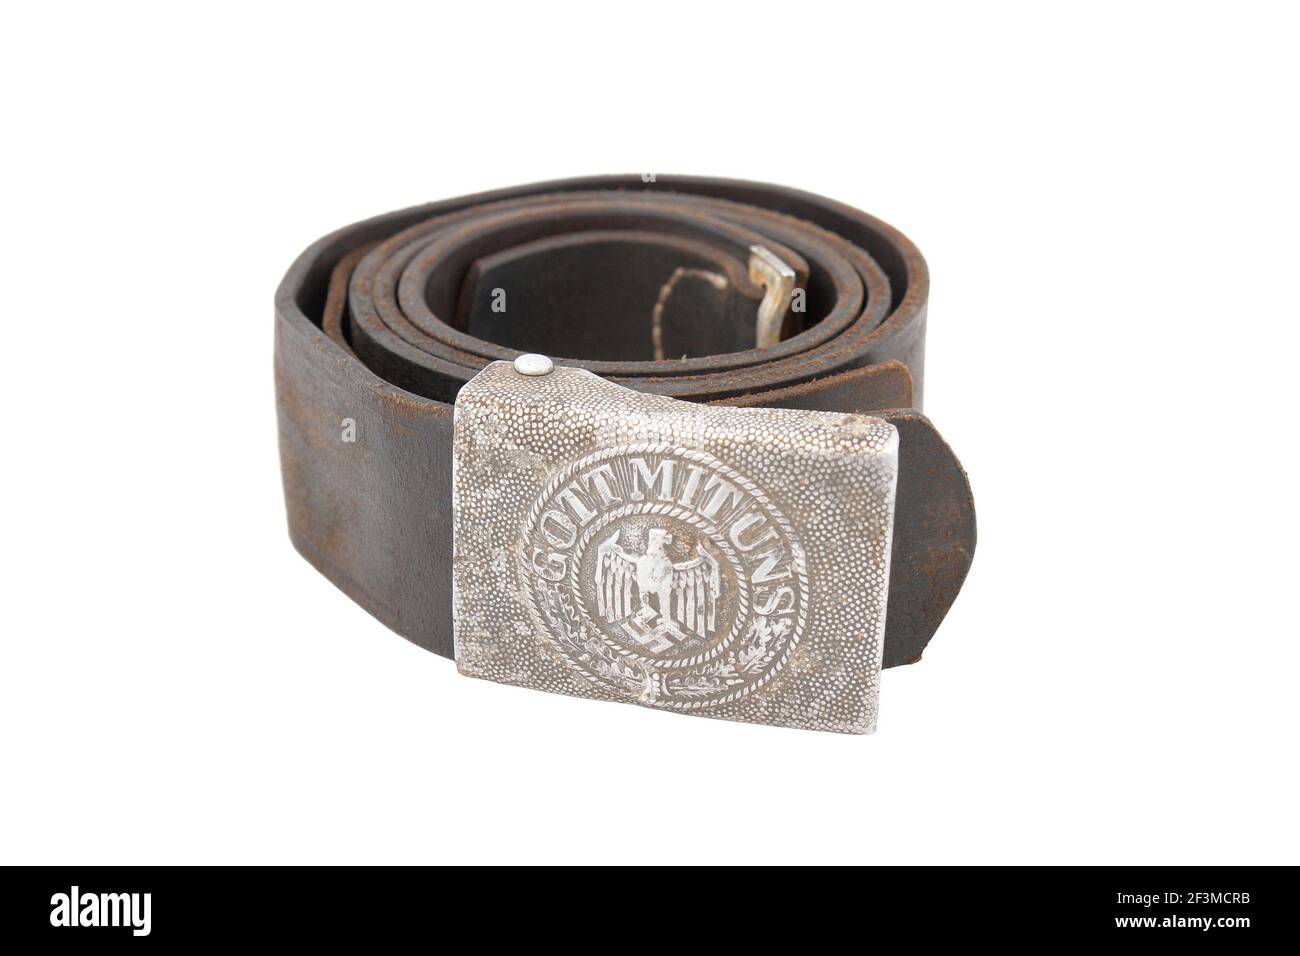 Germany in the Second World War. Vintage German soldier belt (Whermacht). Buckle with imperial eagle and inscription 'God with us' Stock Photo